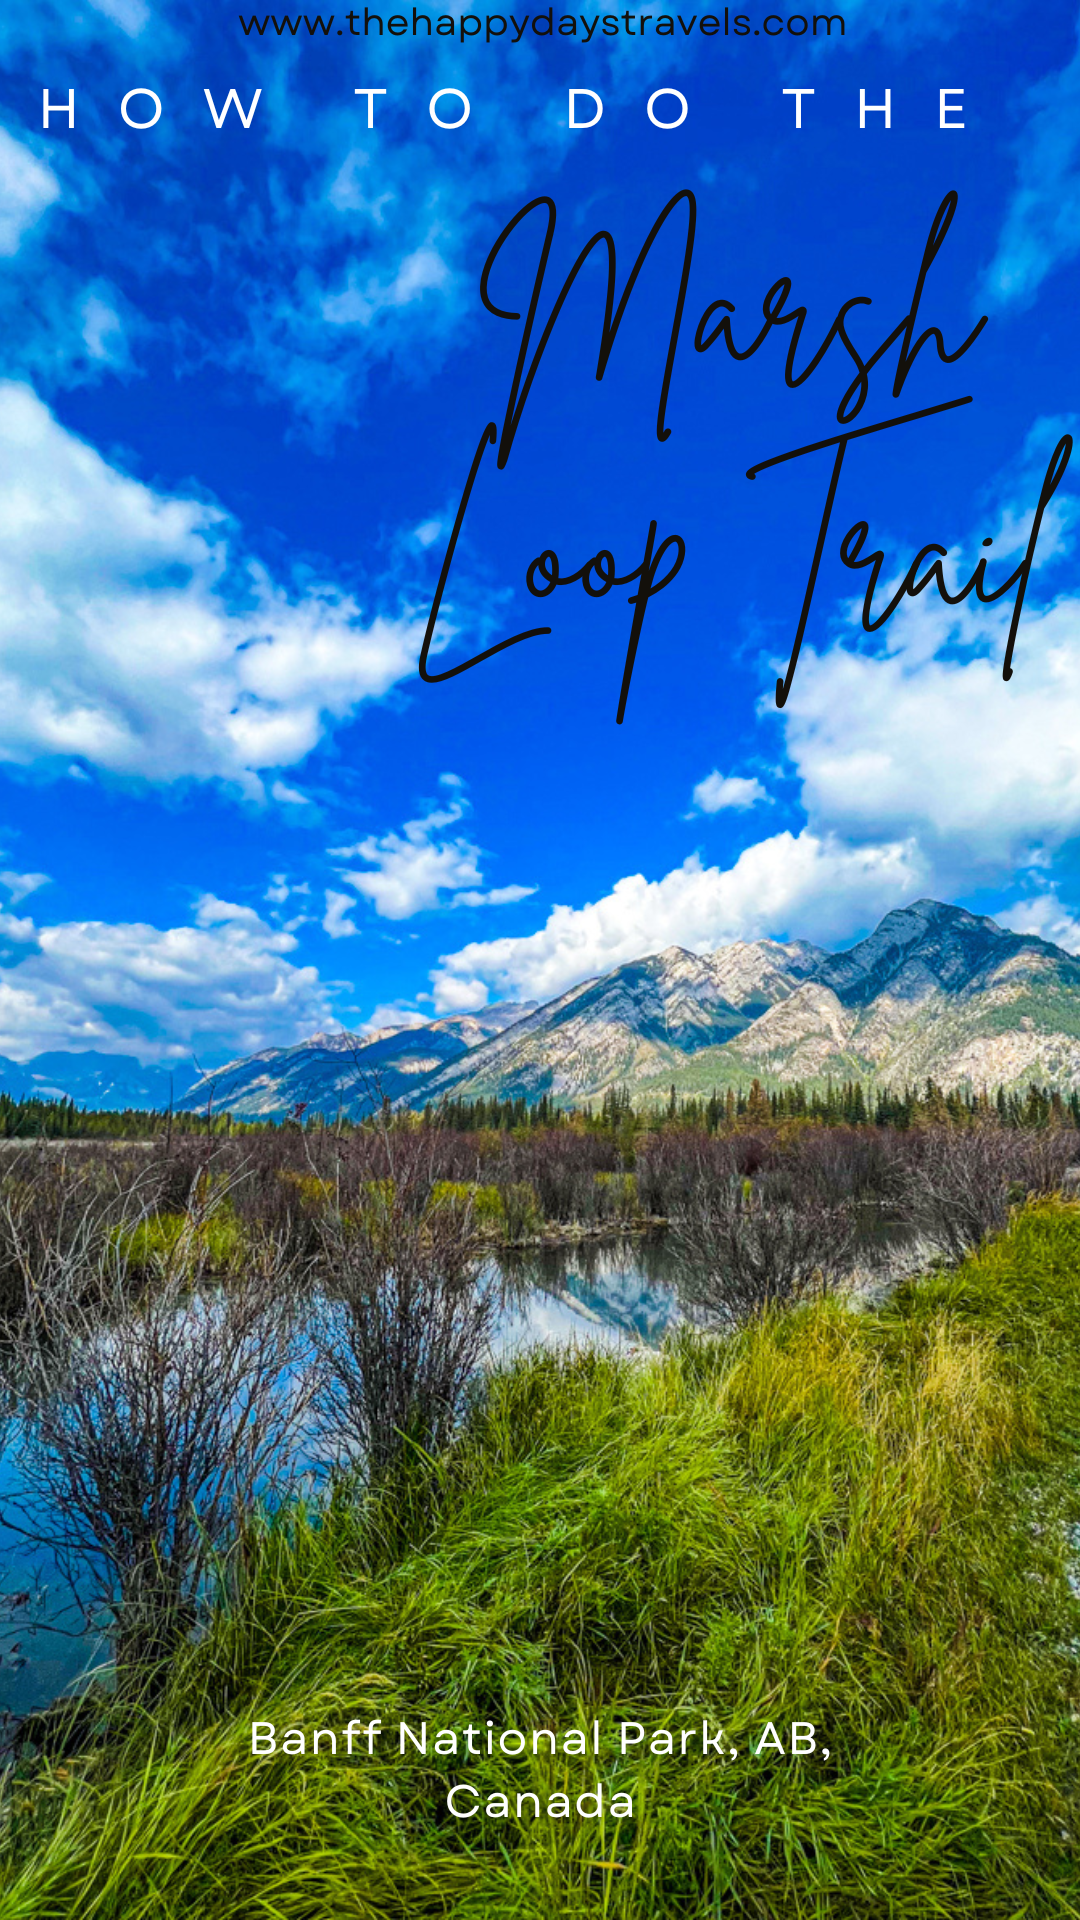 pin image text reads 'how to do the Marsh Loop trail' 'Banff National Park, AB, Canada'. Background image of wetlands at the loop with mountains and blue sky in background.